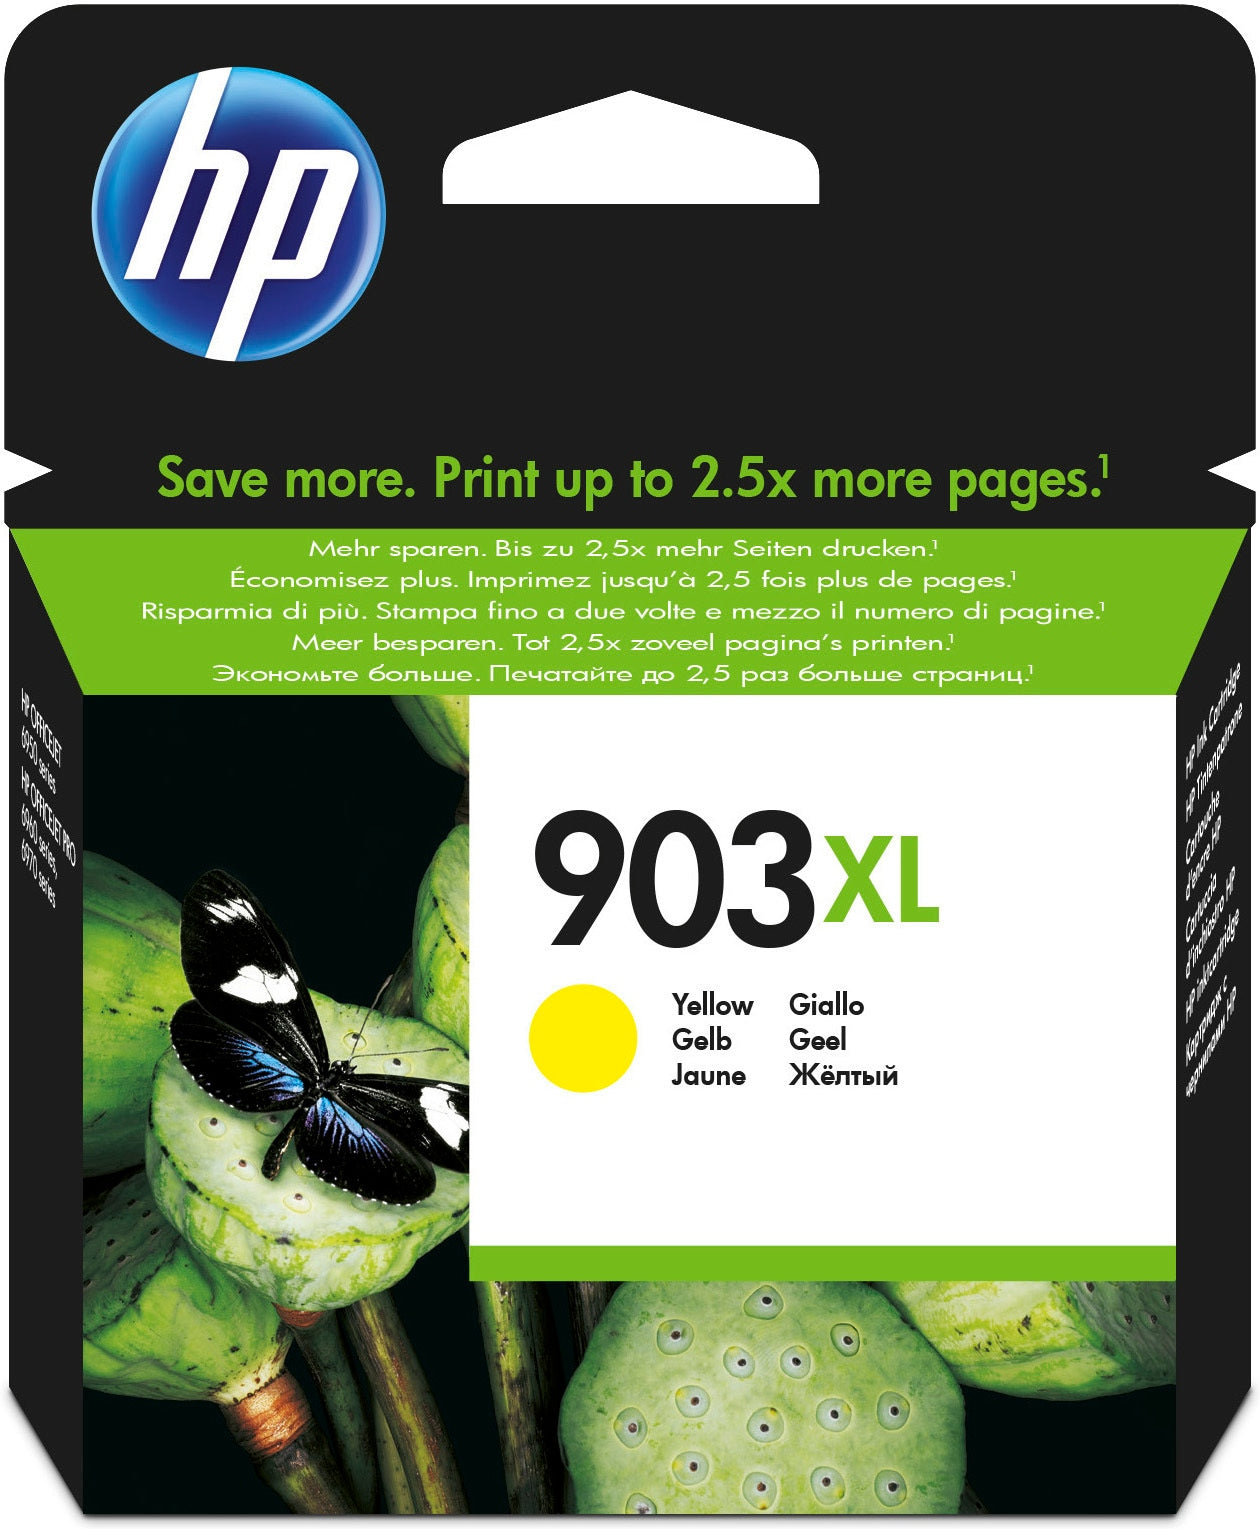 HP T6M11AE/903XL Ink cartridge yellow high-capacity, 750 pages 8.5ml for HP OfficeJet Pro 6860/6950